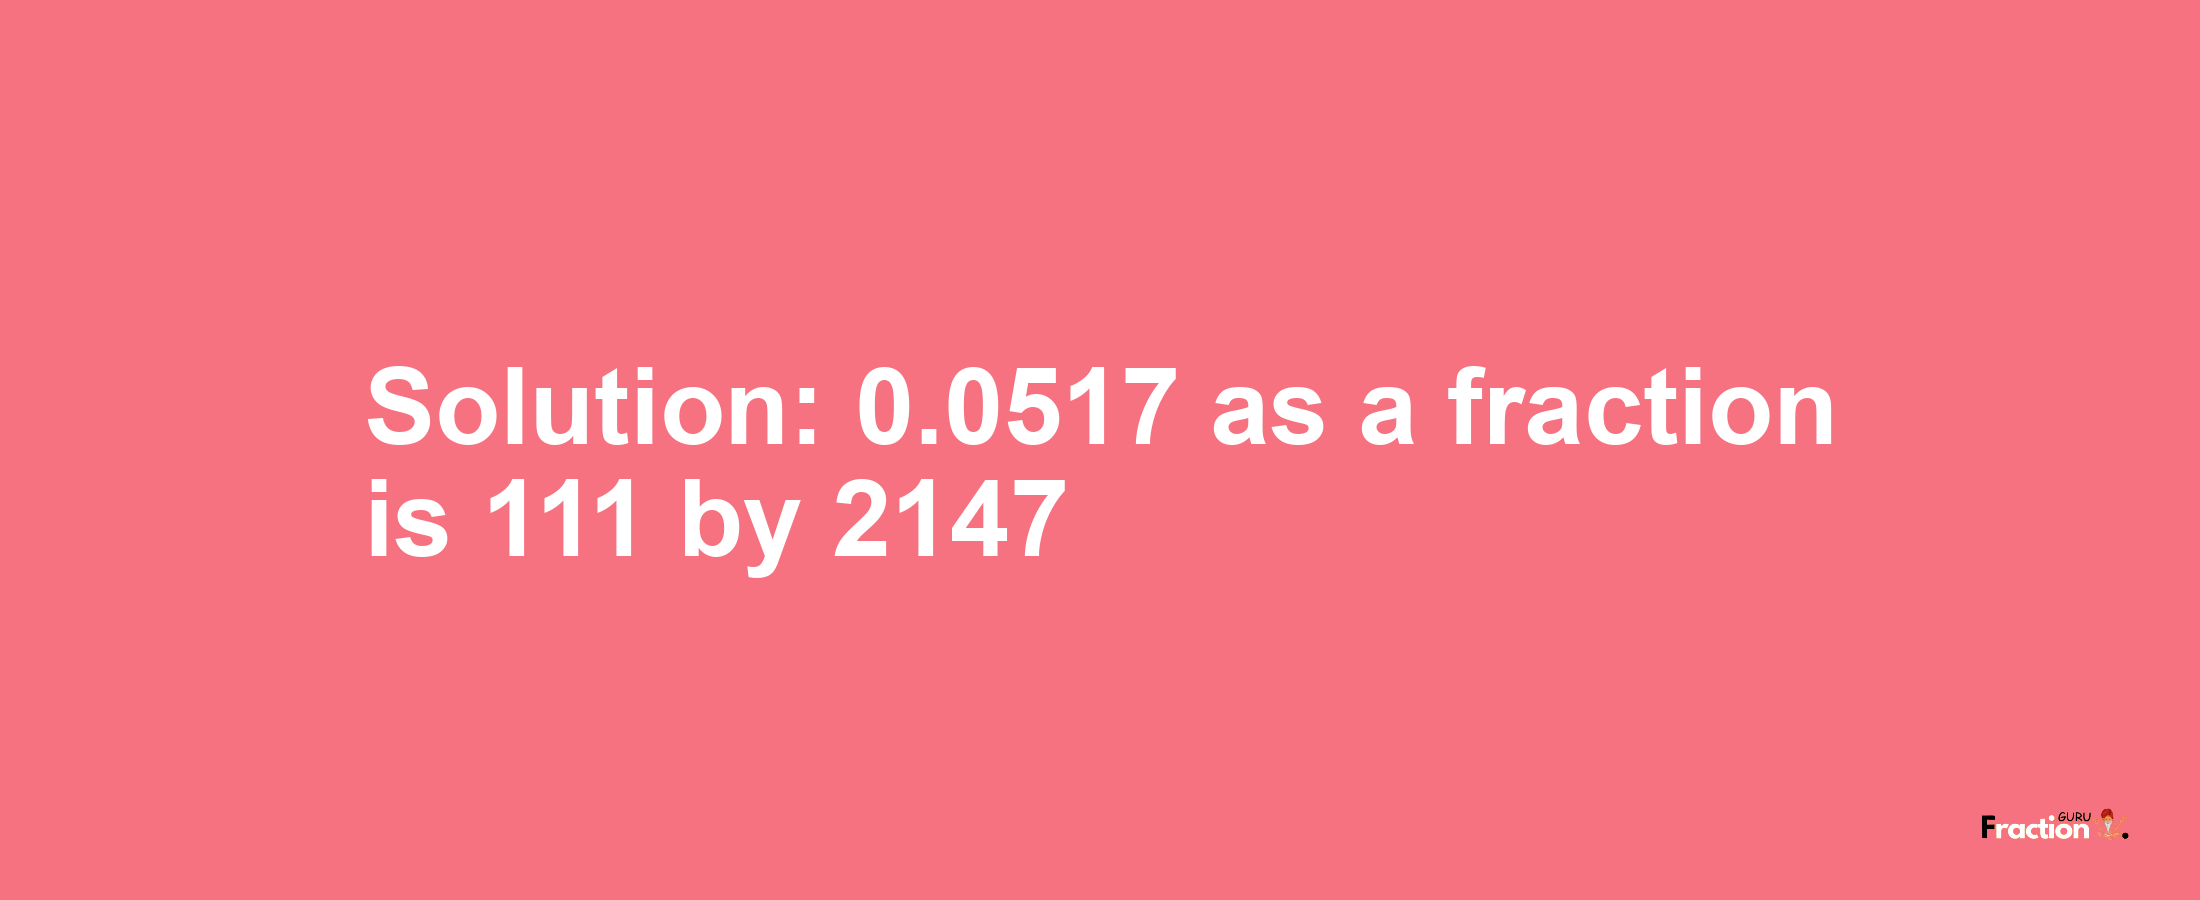 Solution:0.0517 as a fraction is 111/2147